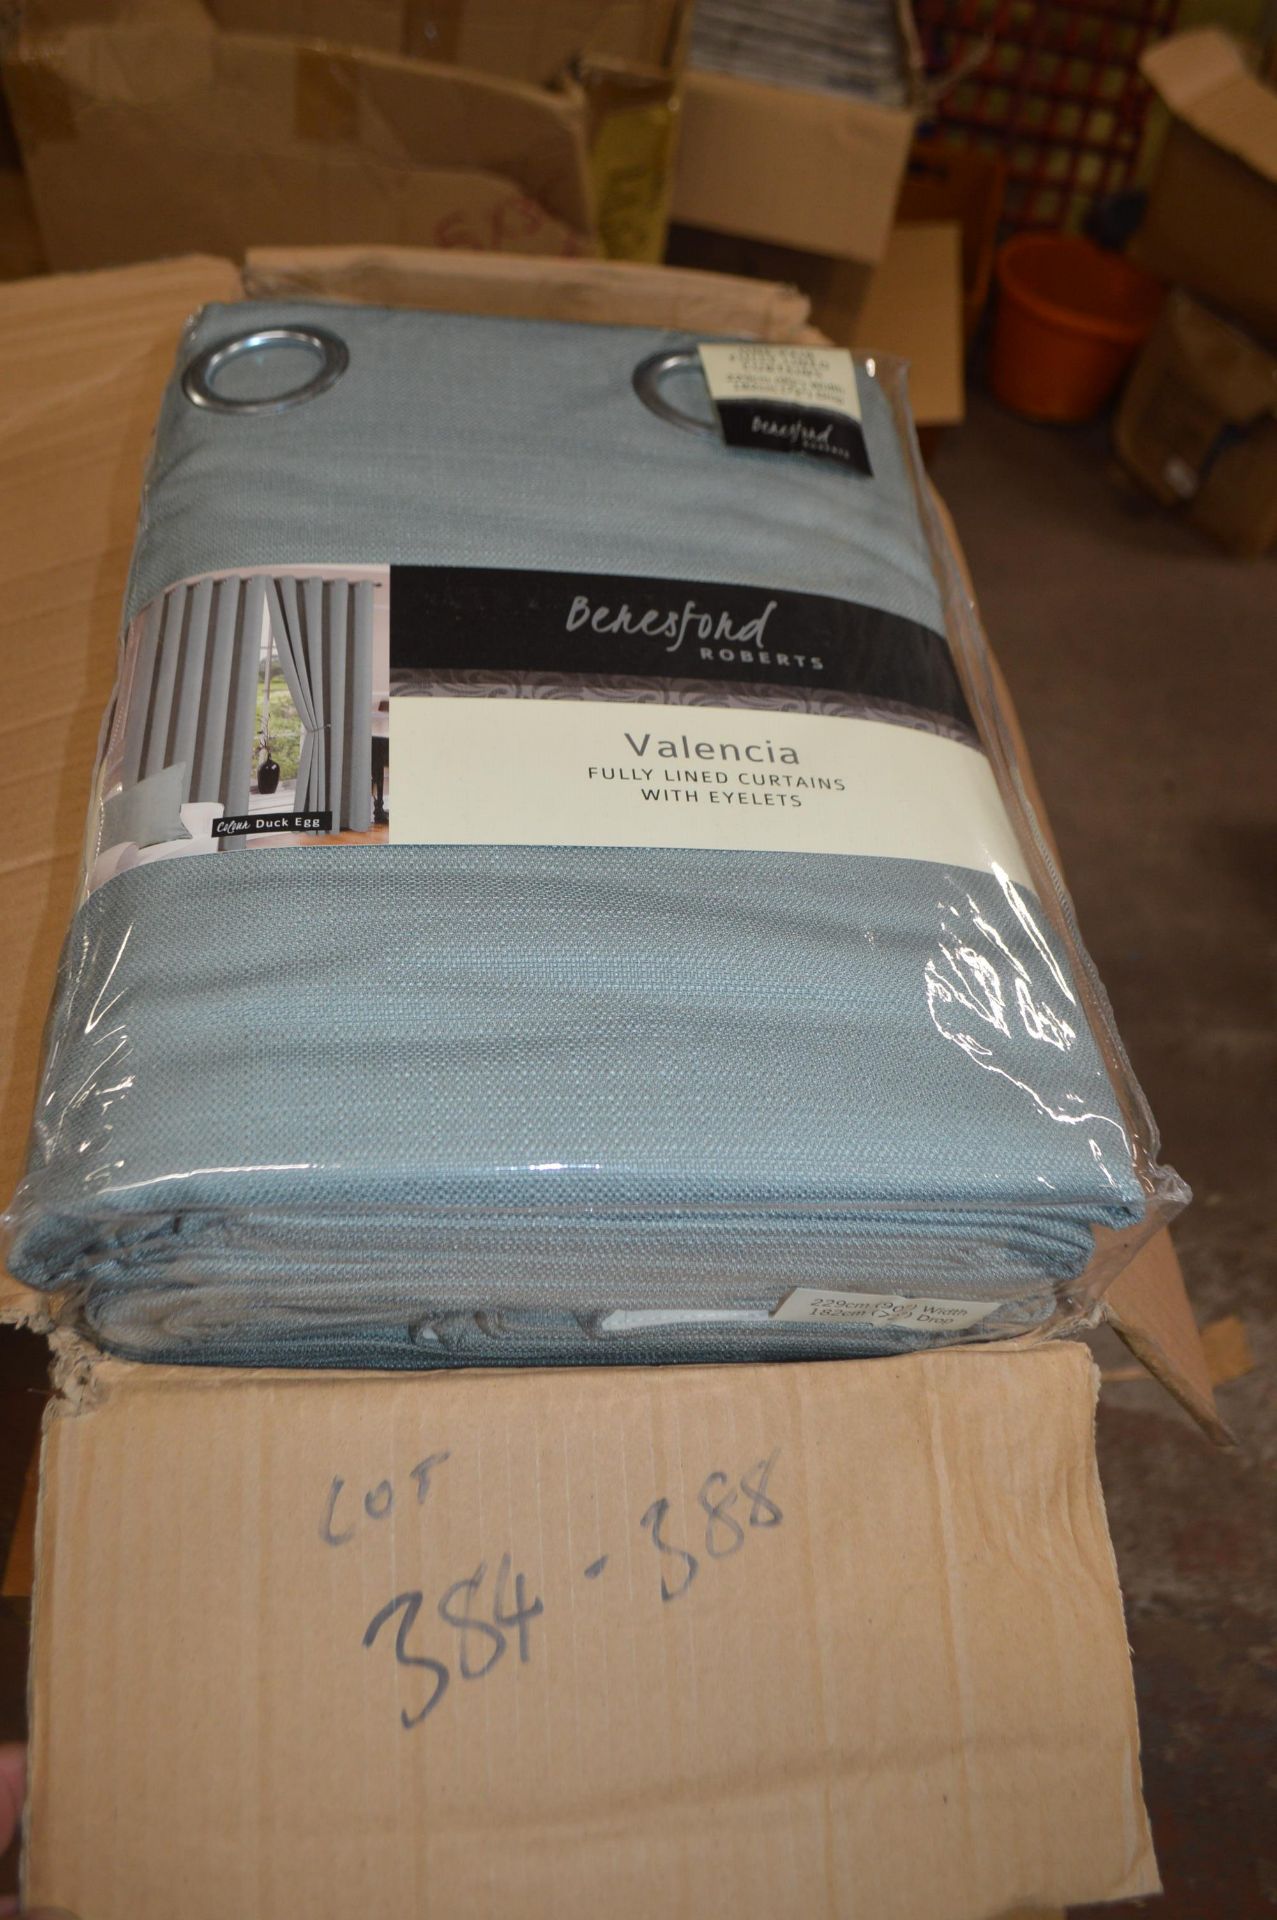 *Beresford Robert Valencia Lined Eyelet Curtains in Duck Egg Blue 90” x 72” drop